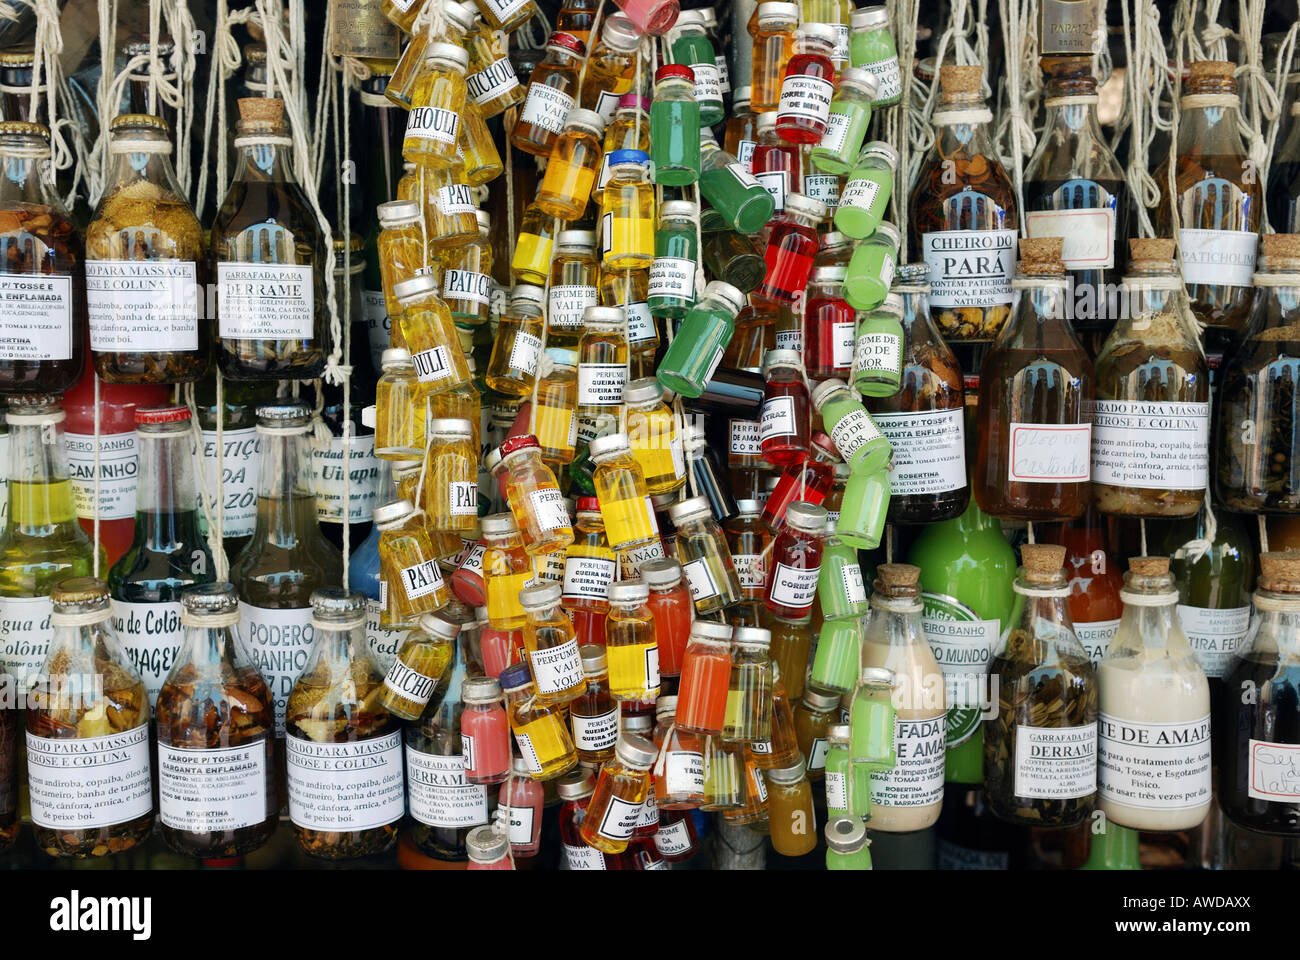 Essences made of herbs, roots and oils from the Amazon rainforest, 'Ver-O-Peso' market, Belem, Para, Brazil Stock Photo